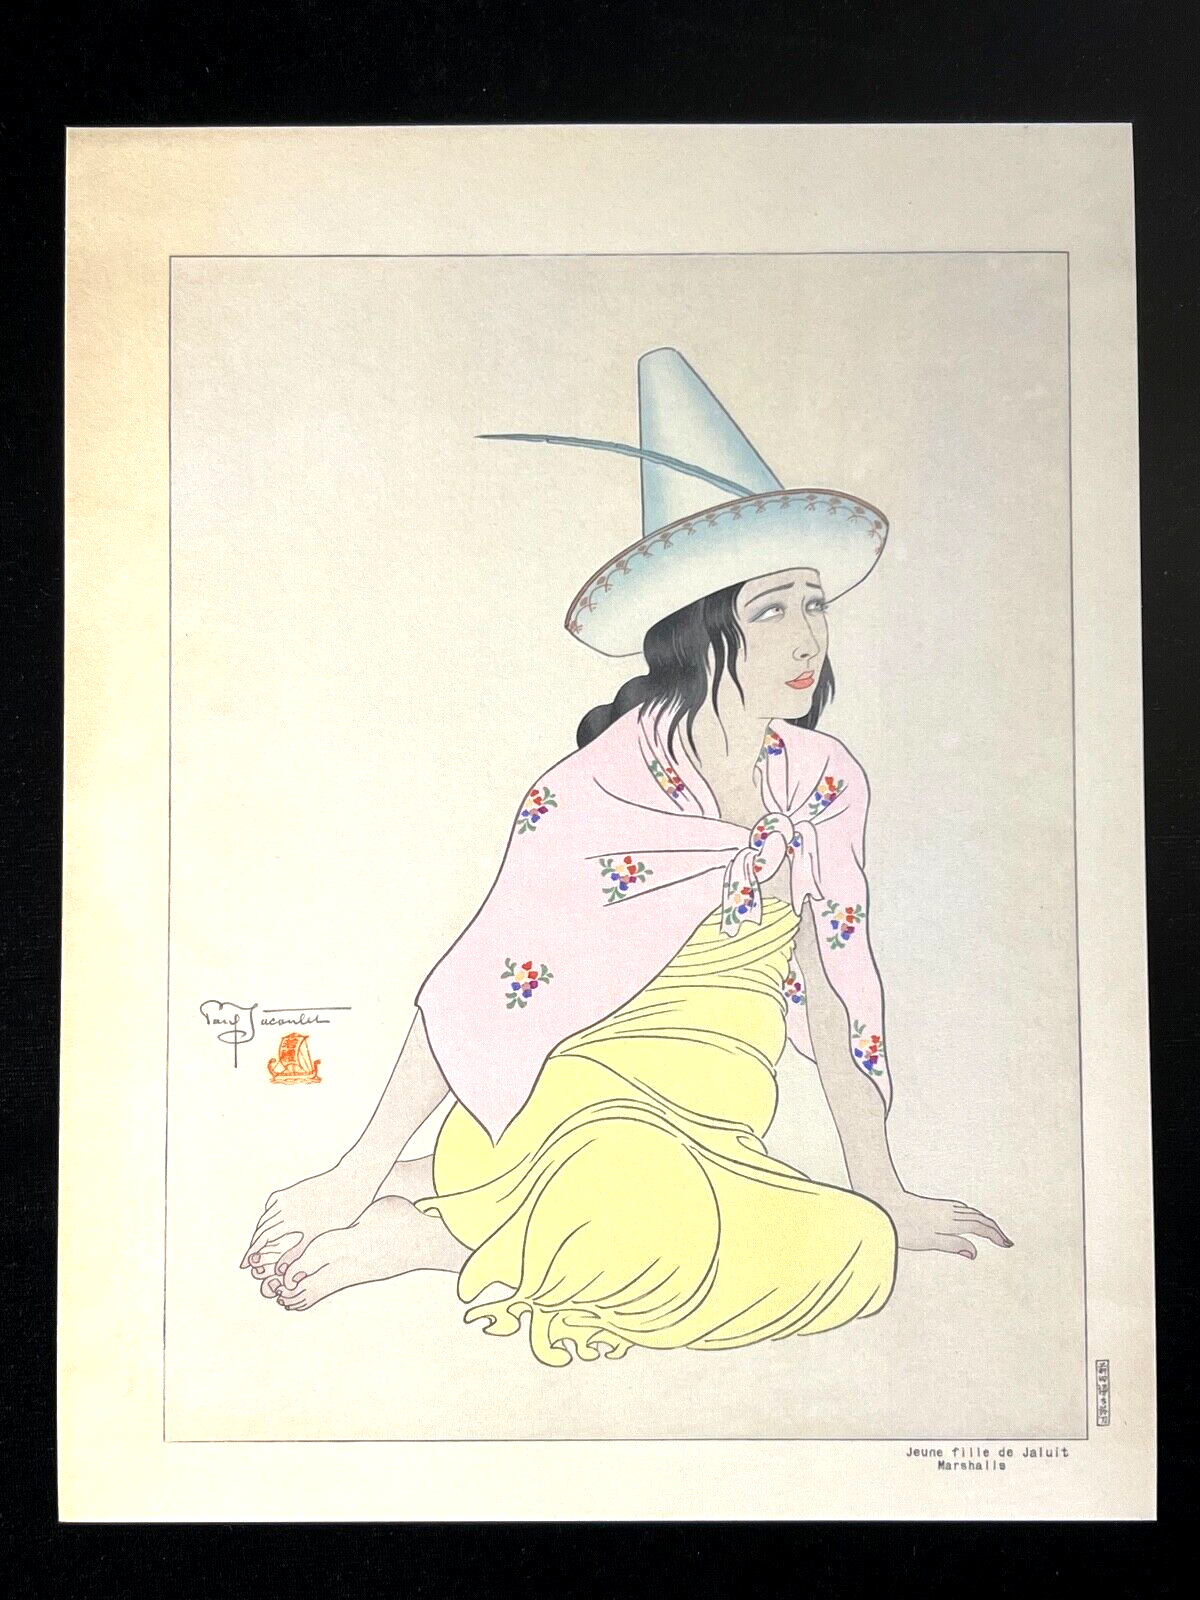 Paul Jacoulet Giclee Woodblock Print "Young Girl Of Jaluit" 7.75"x10"